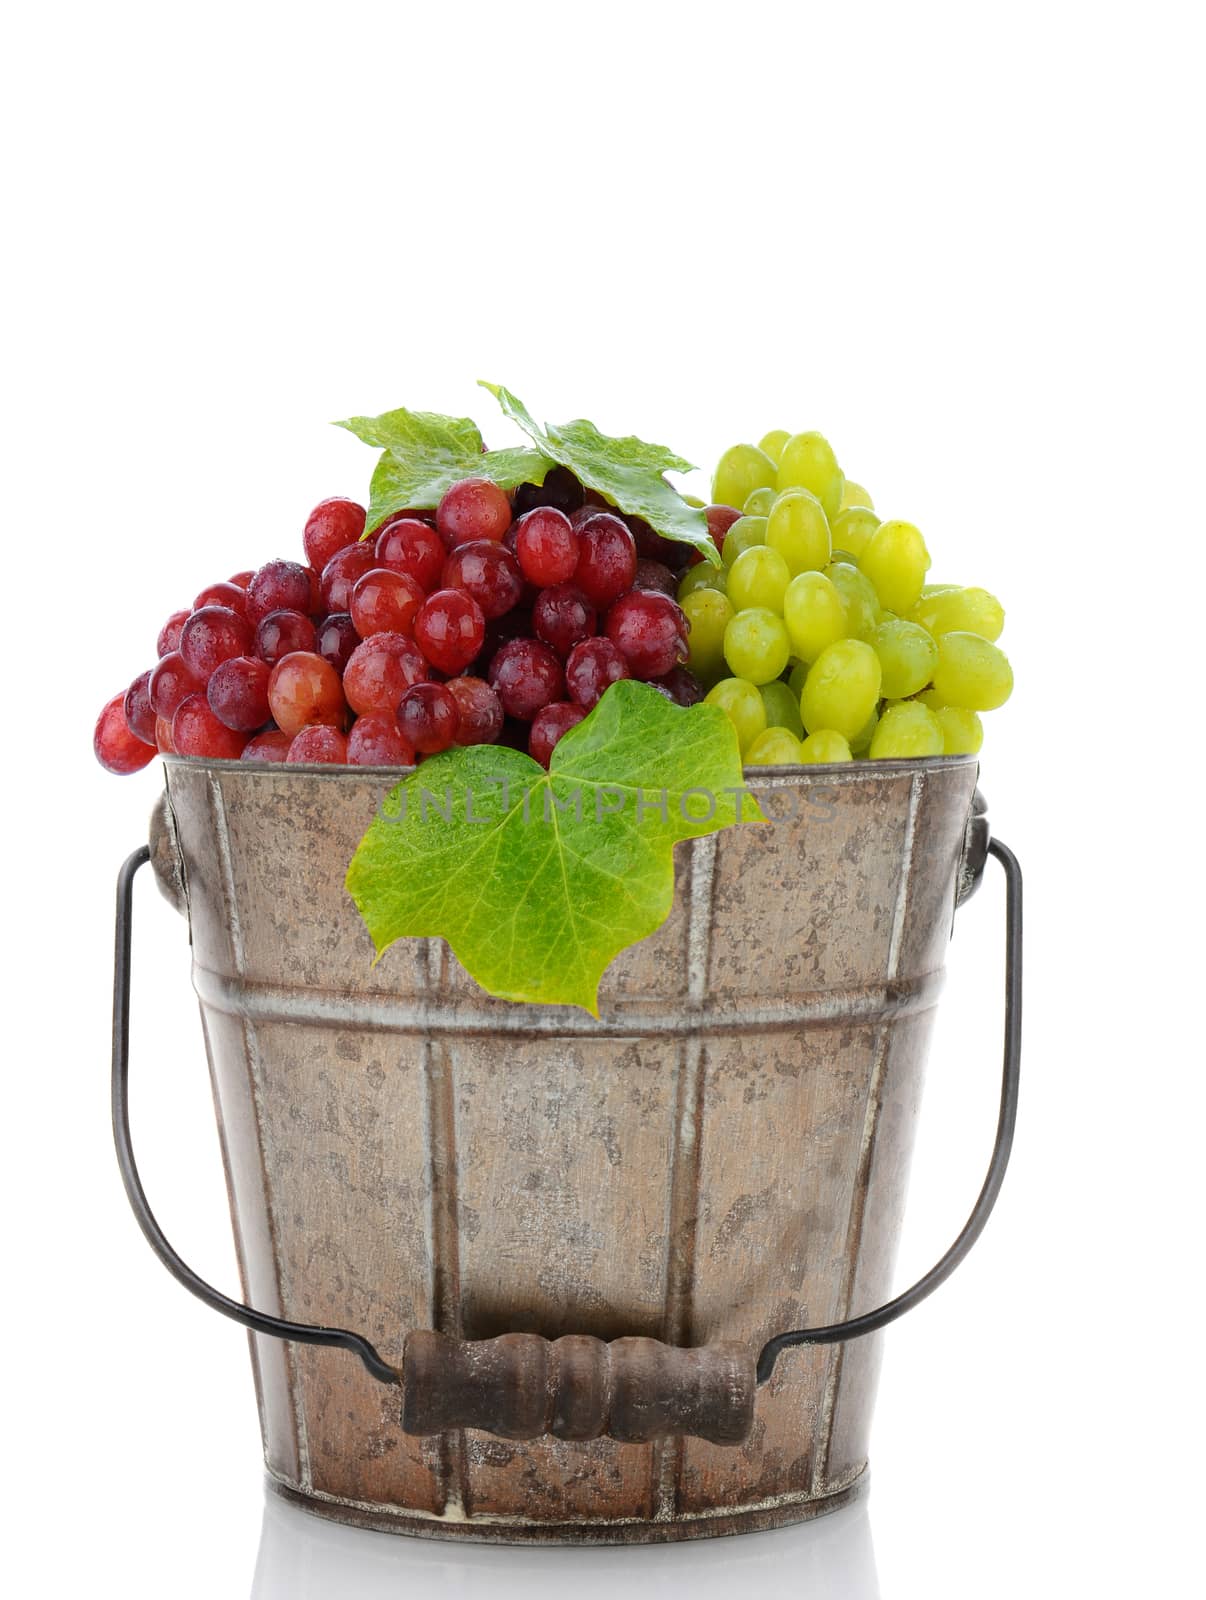 An old metal bucket full of fresh ripe red and green grapes. Vertical format on a white background with reflection.